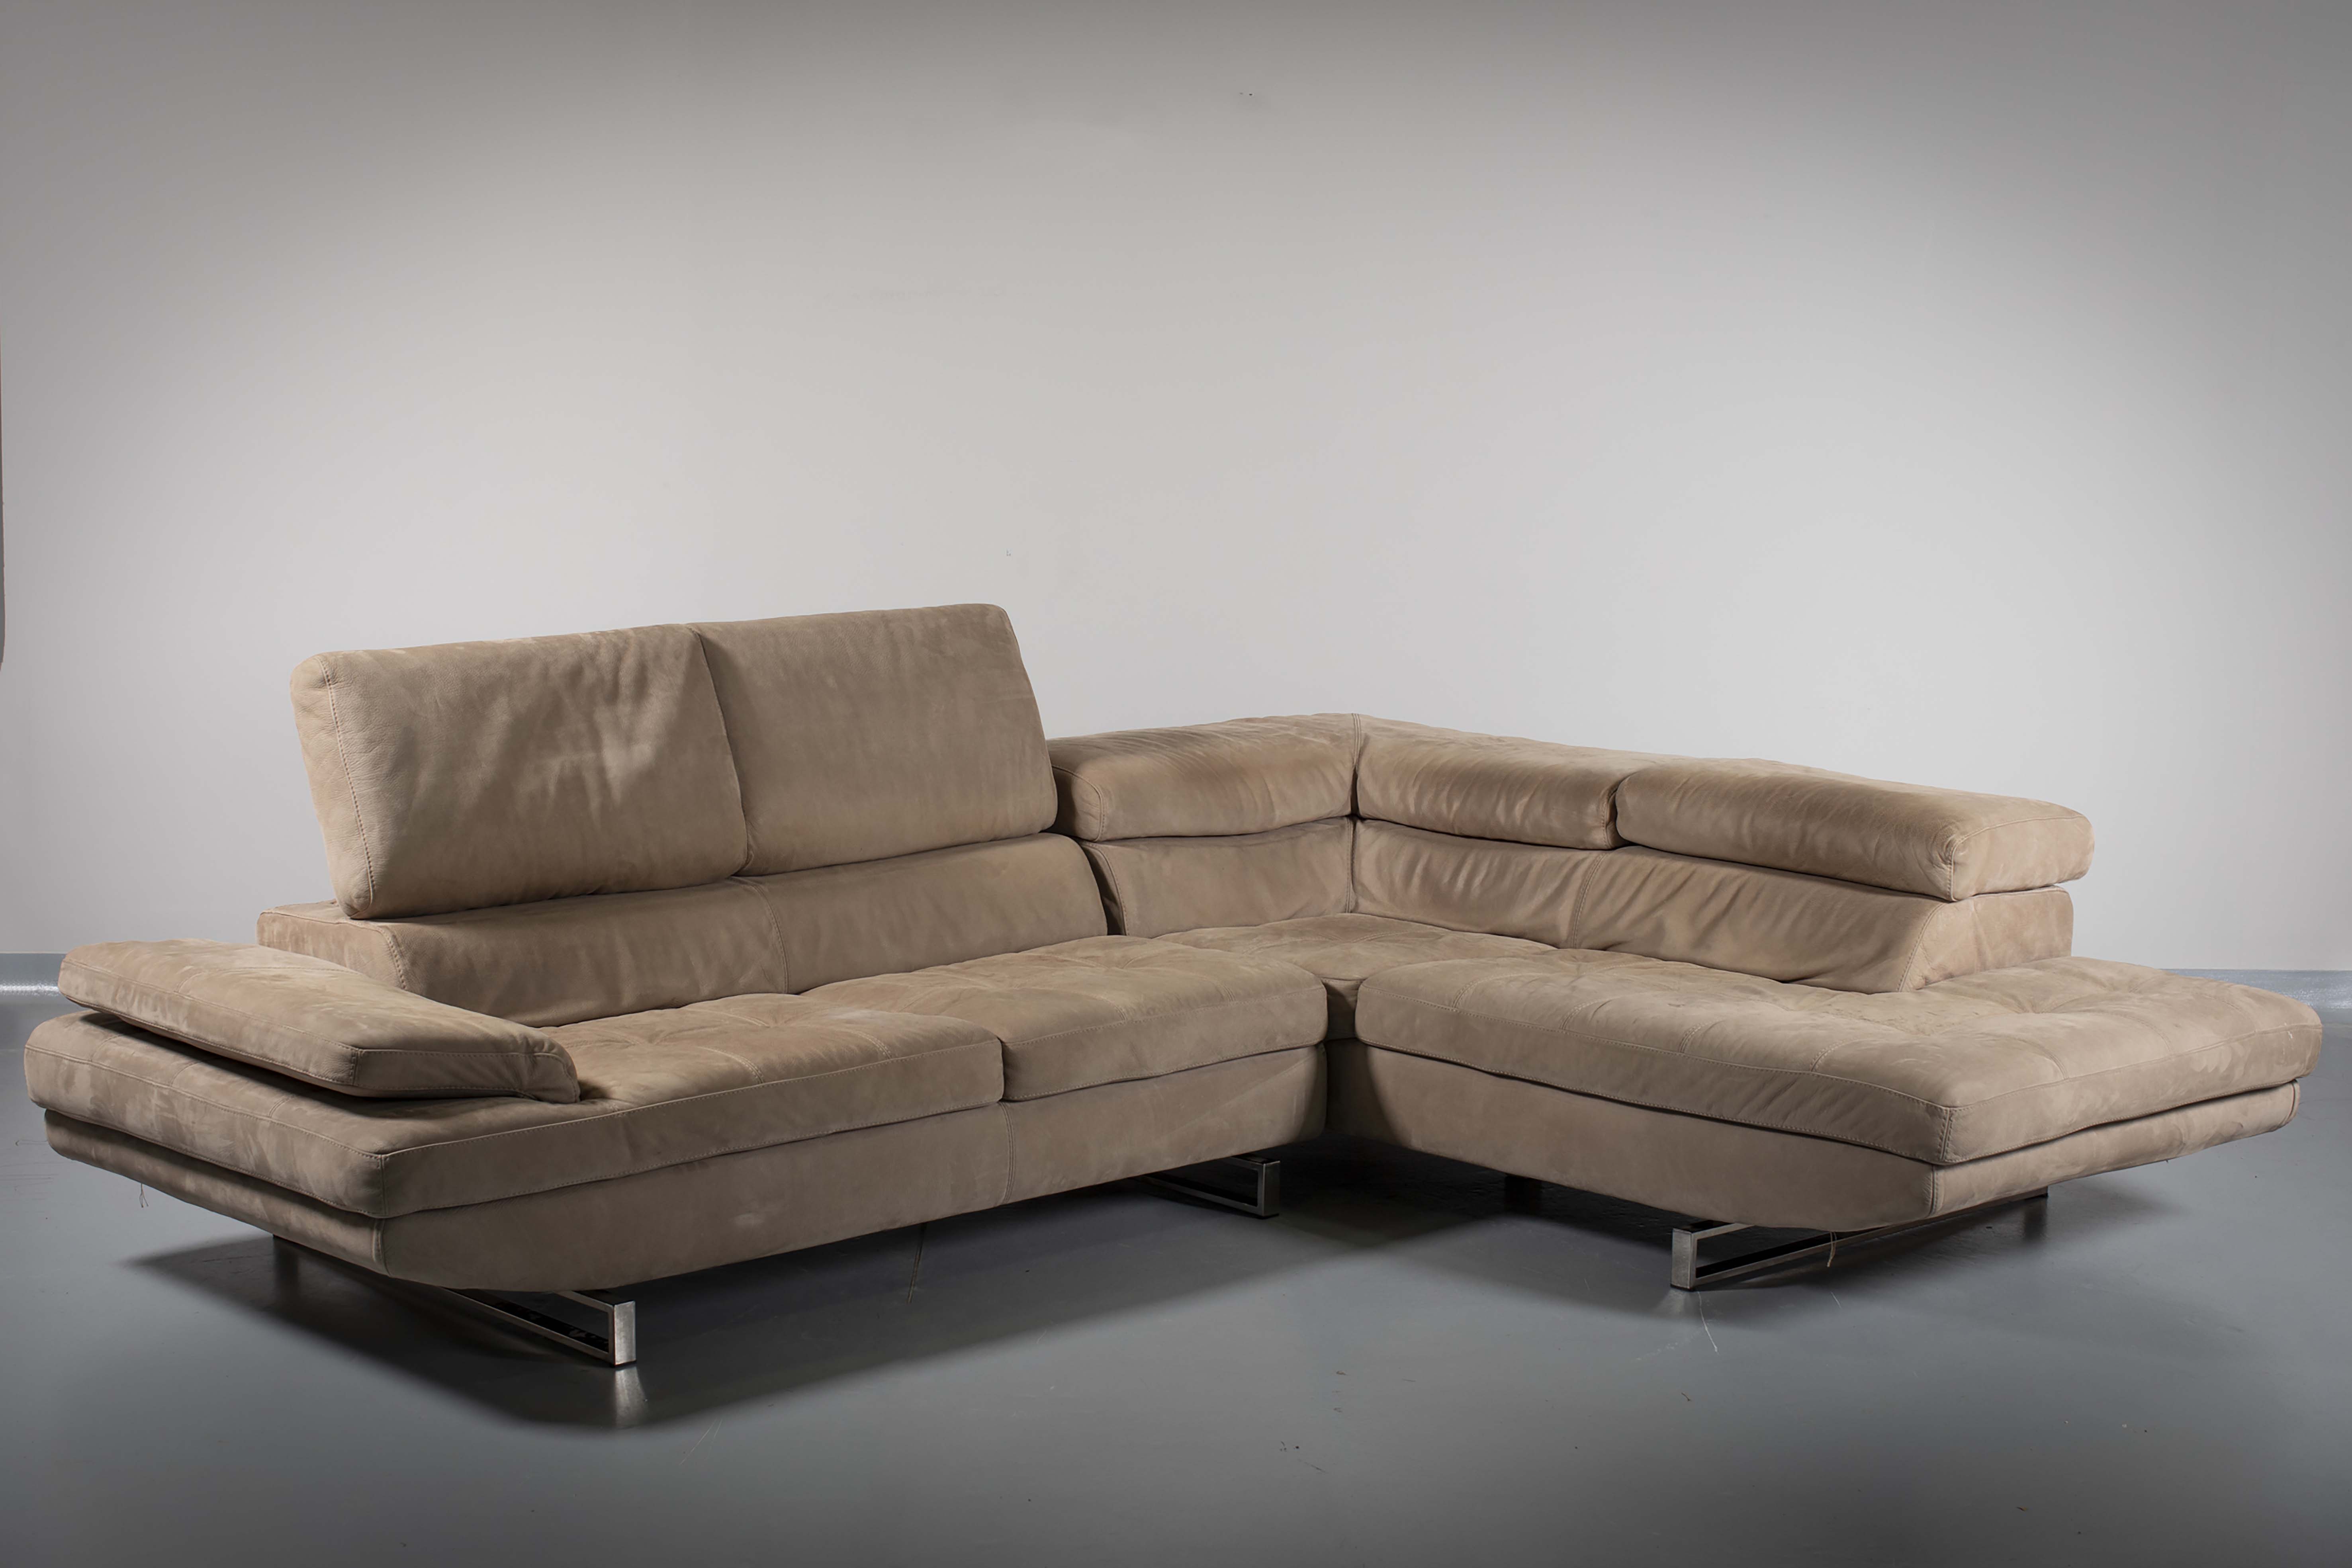 AN ITALIAN LEATHER L-SHAPED HABART SOFA, BY MAX DIVANI, with adjustable head rests, on chrome bases,